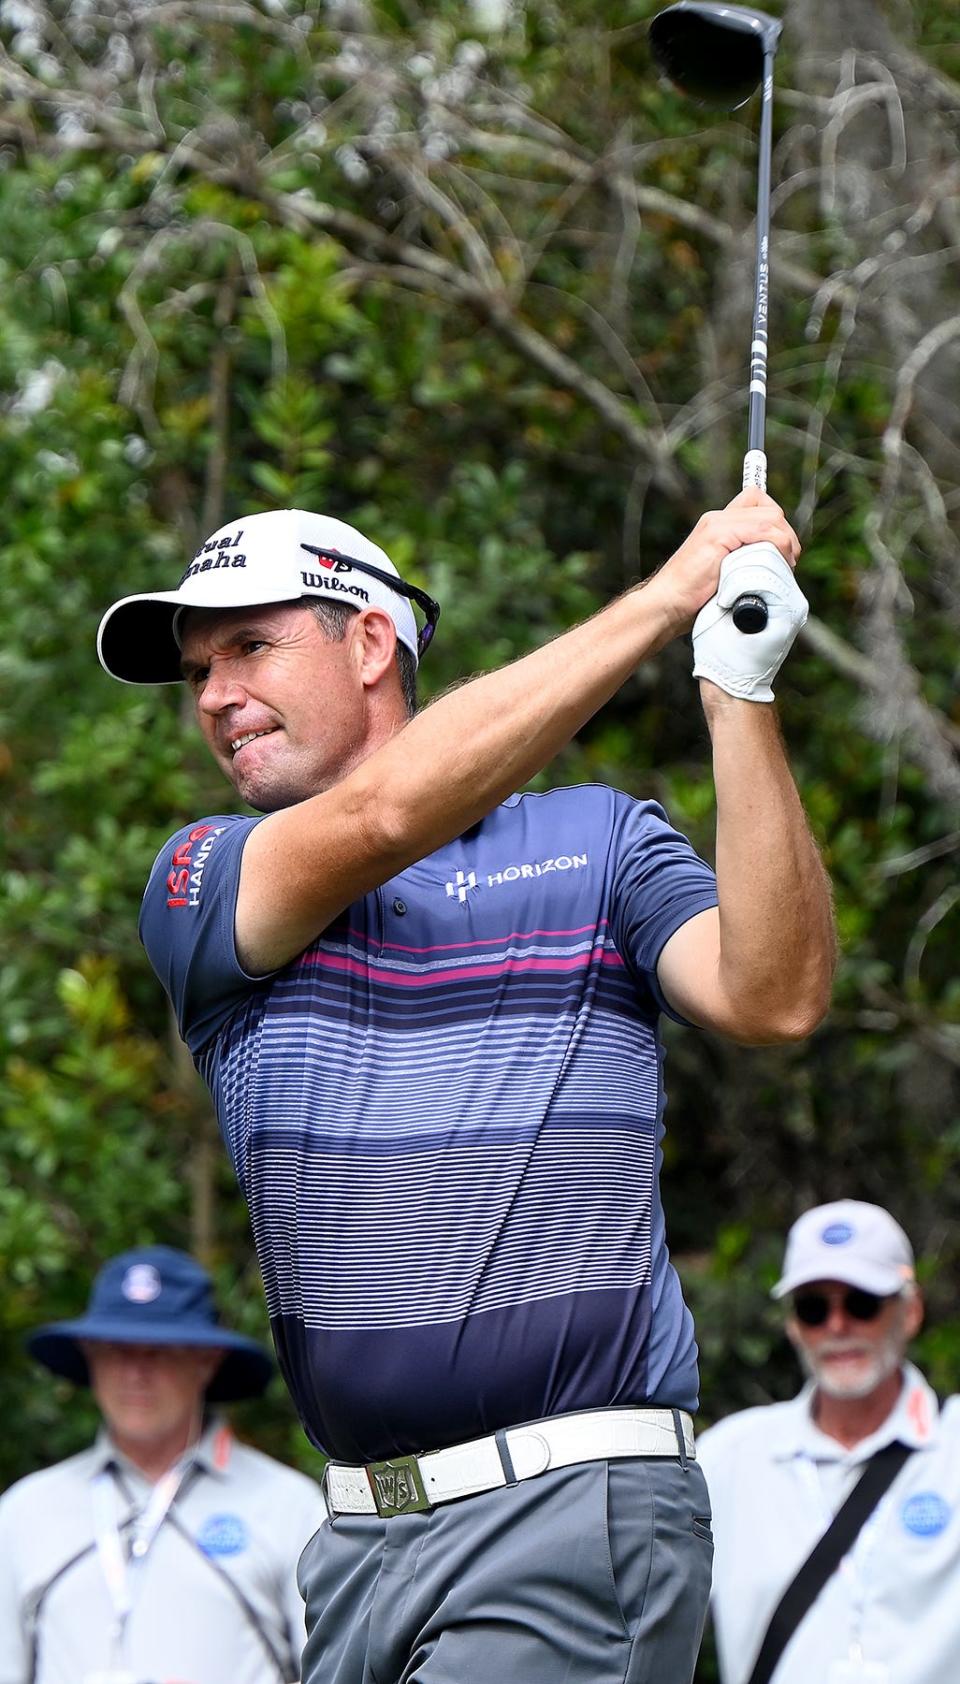 Padraig Harrington tees off on the 16th tee during the 35th Anniversary of the Chubb Classic at the Tiburon Golf Club in Naples, Saturday, Feb. 19, 2022.
(Credit: Chris Tilley/Special to The Naples Daily News)